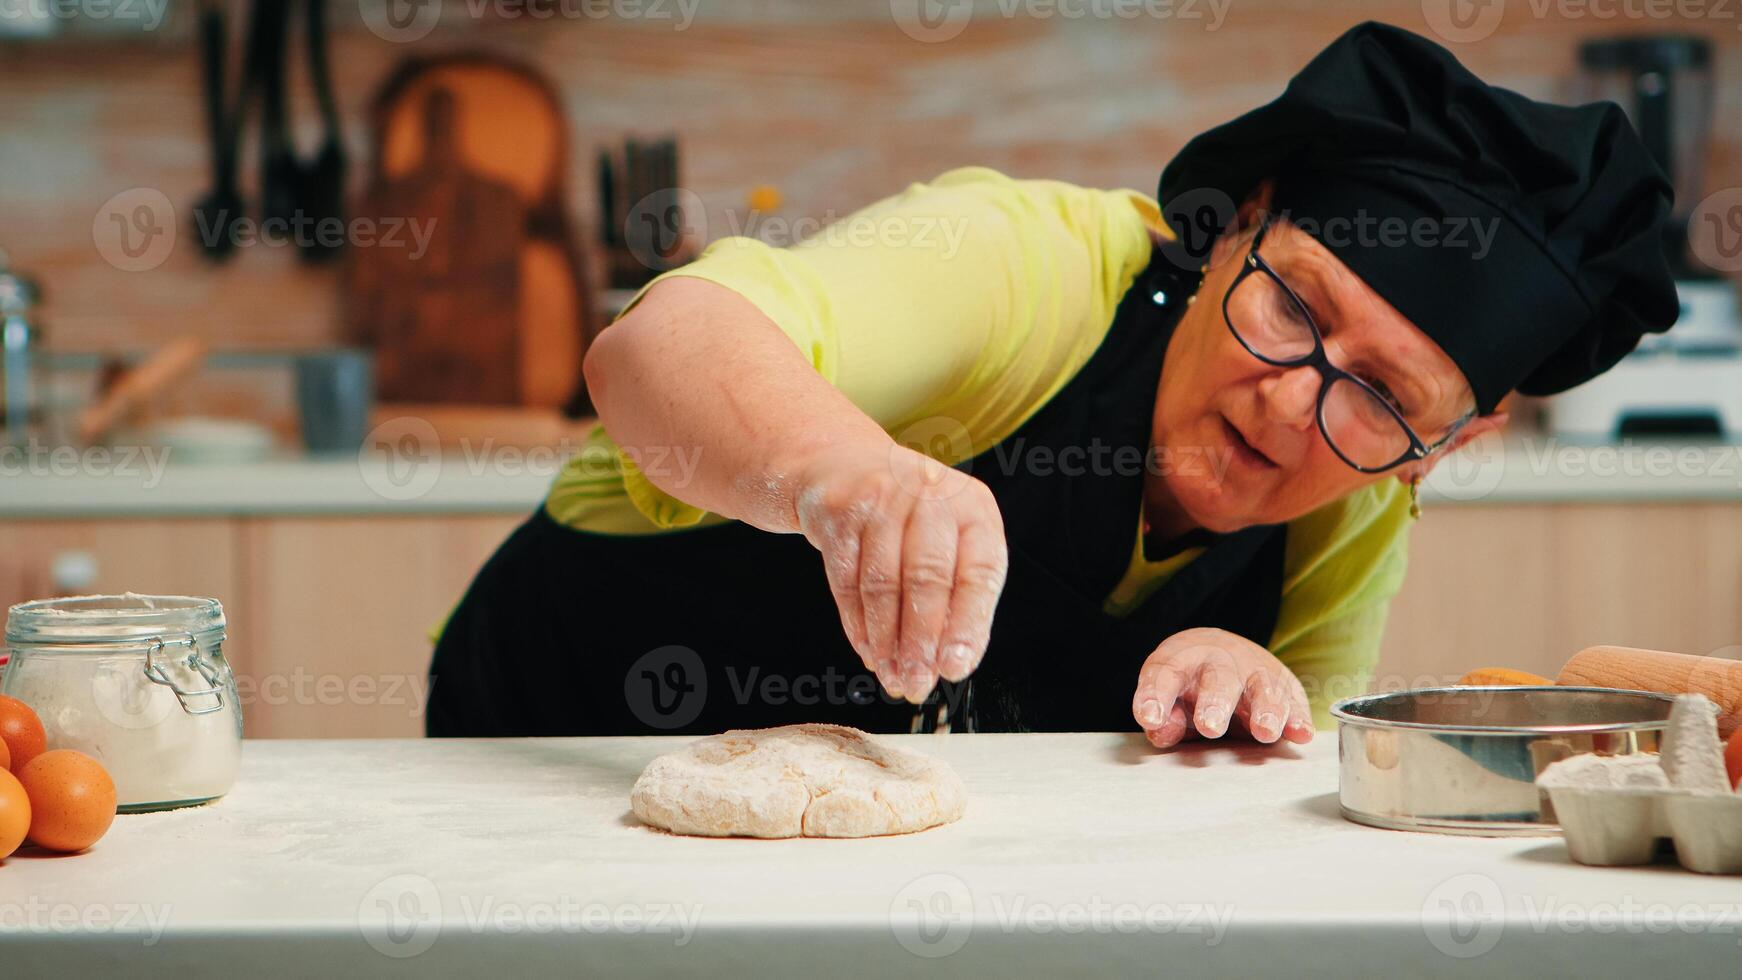 Woman with bonete and kitchen apron is occupied with dough preparation. Retired senior baker with apron, kitchen uniform sprinkling, sifting, spreading flour with hand baking homemade pizza and bread. photo